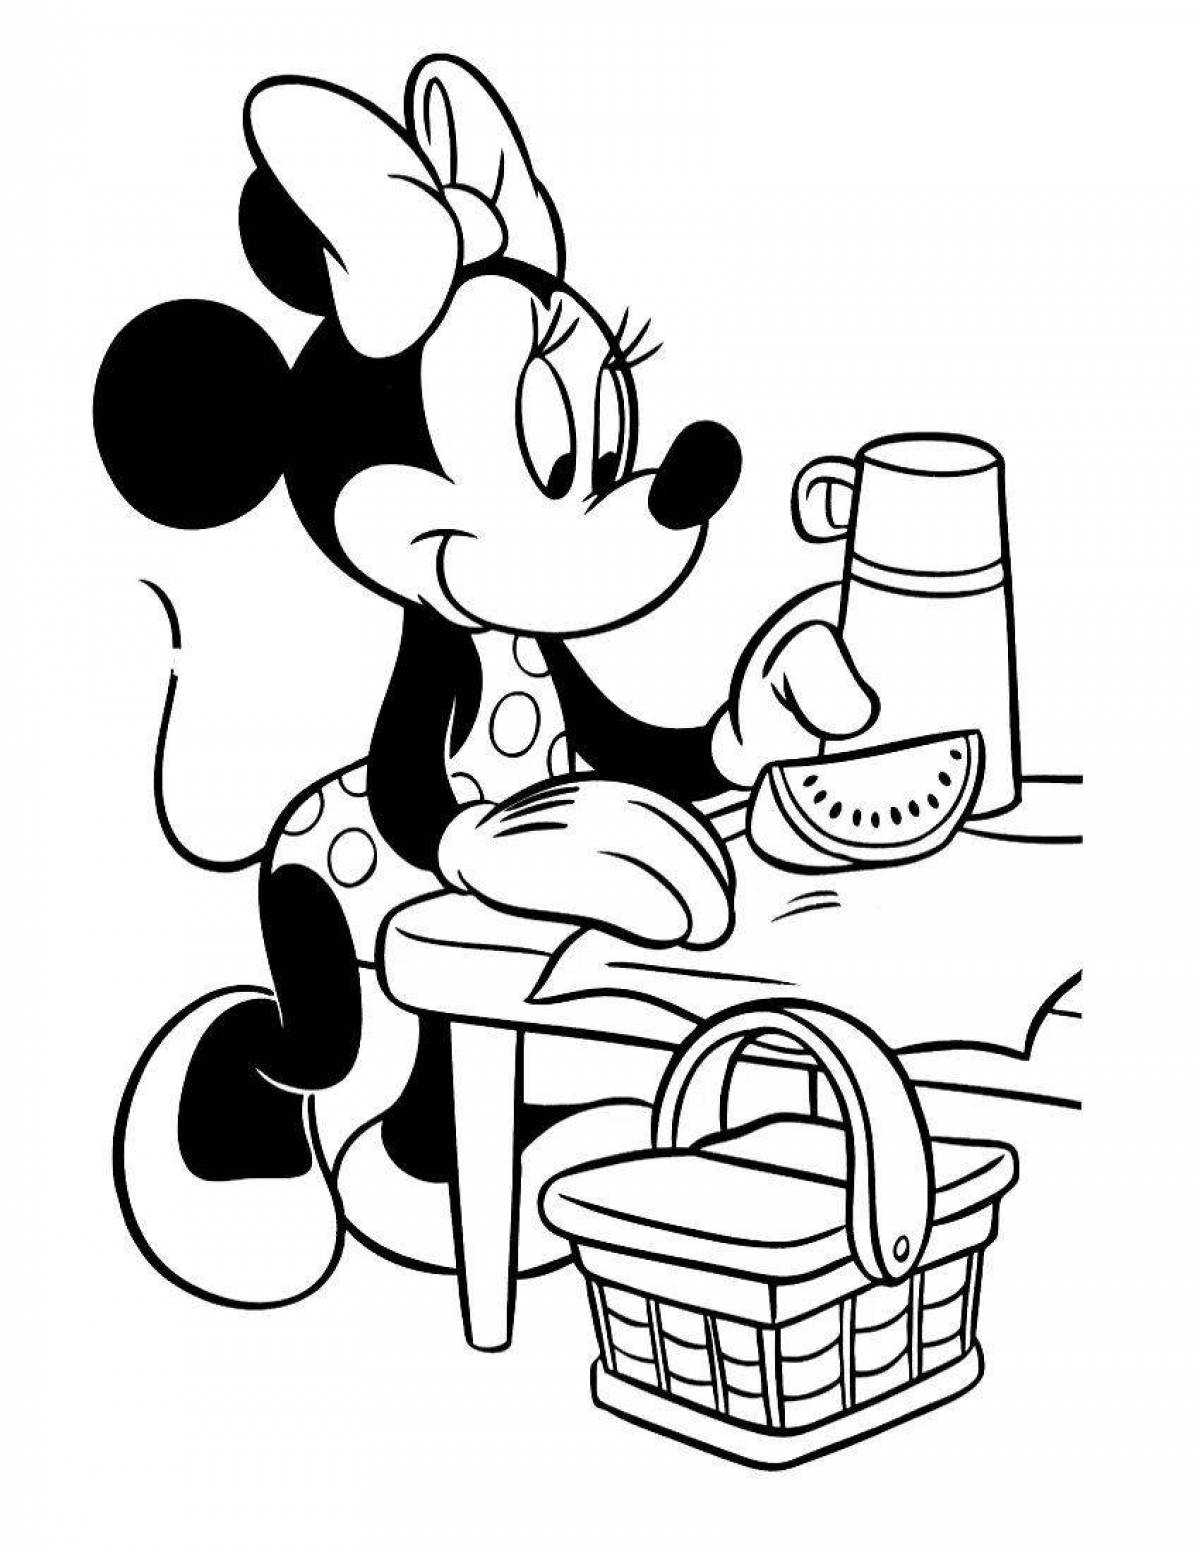 Mickey mouse for kids #9